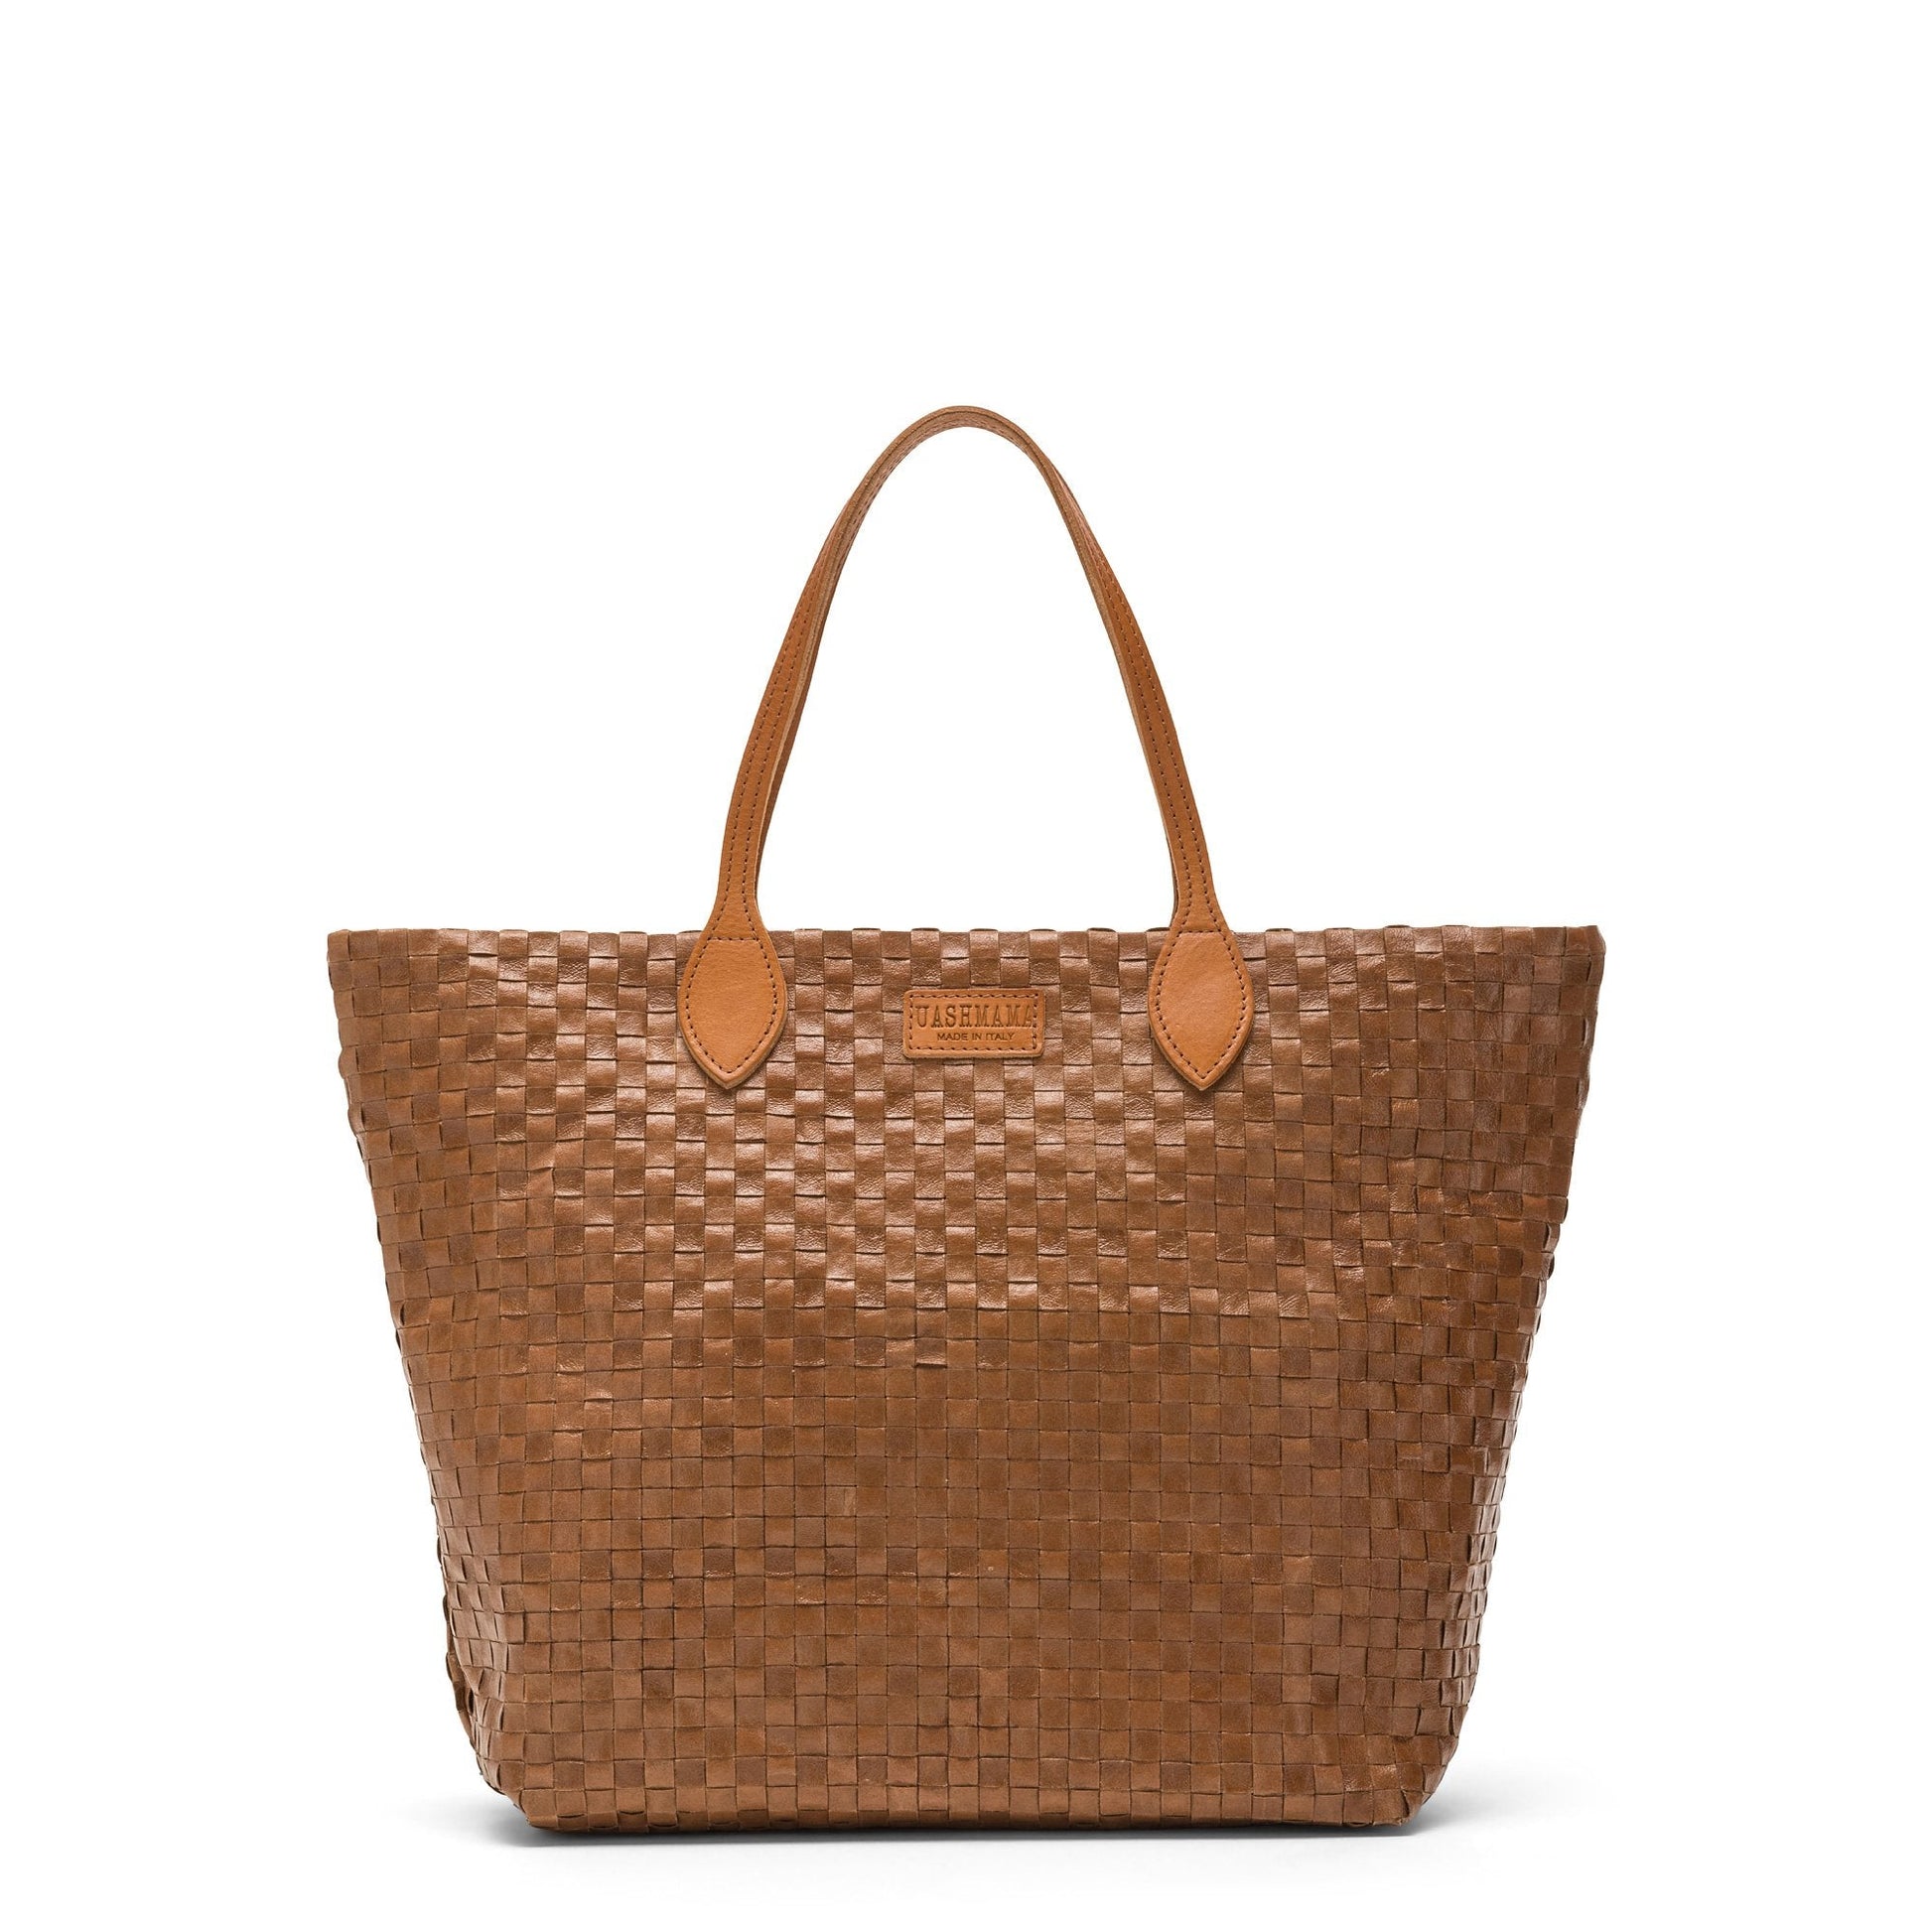 A large washable paper woven tote is shown. It has two long tan leather handles and a tan leather UASHMAMA logo label on the outside in between the handles. The bag shown is in a dark tan colour.